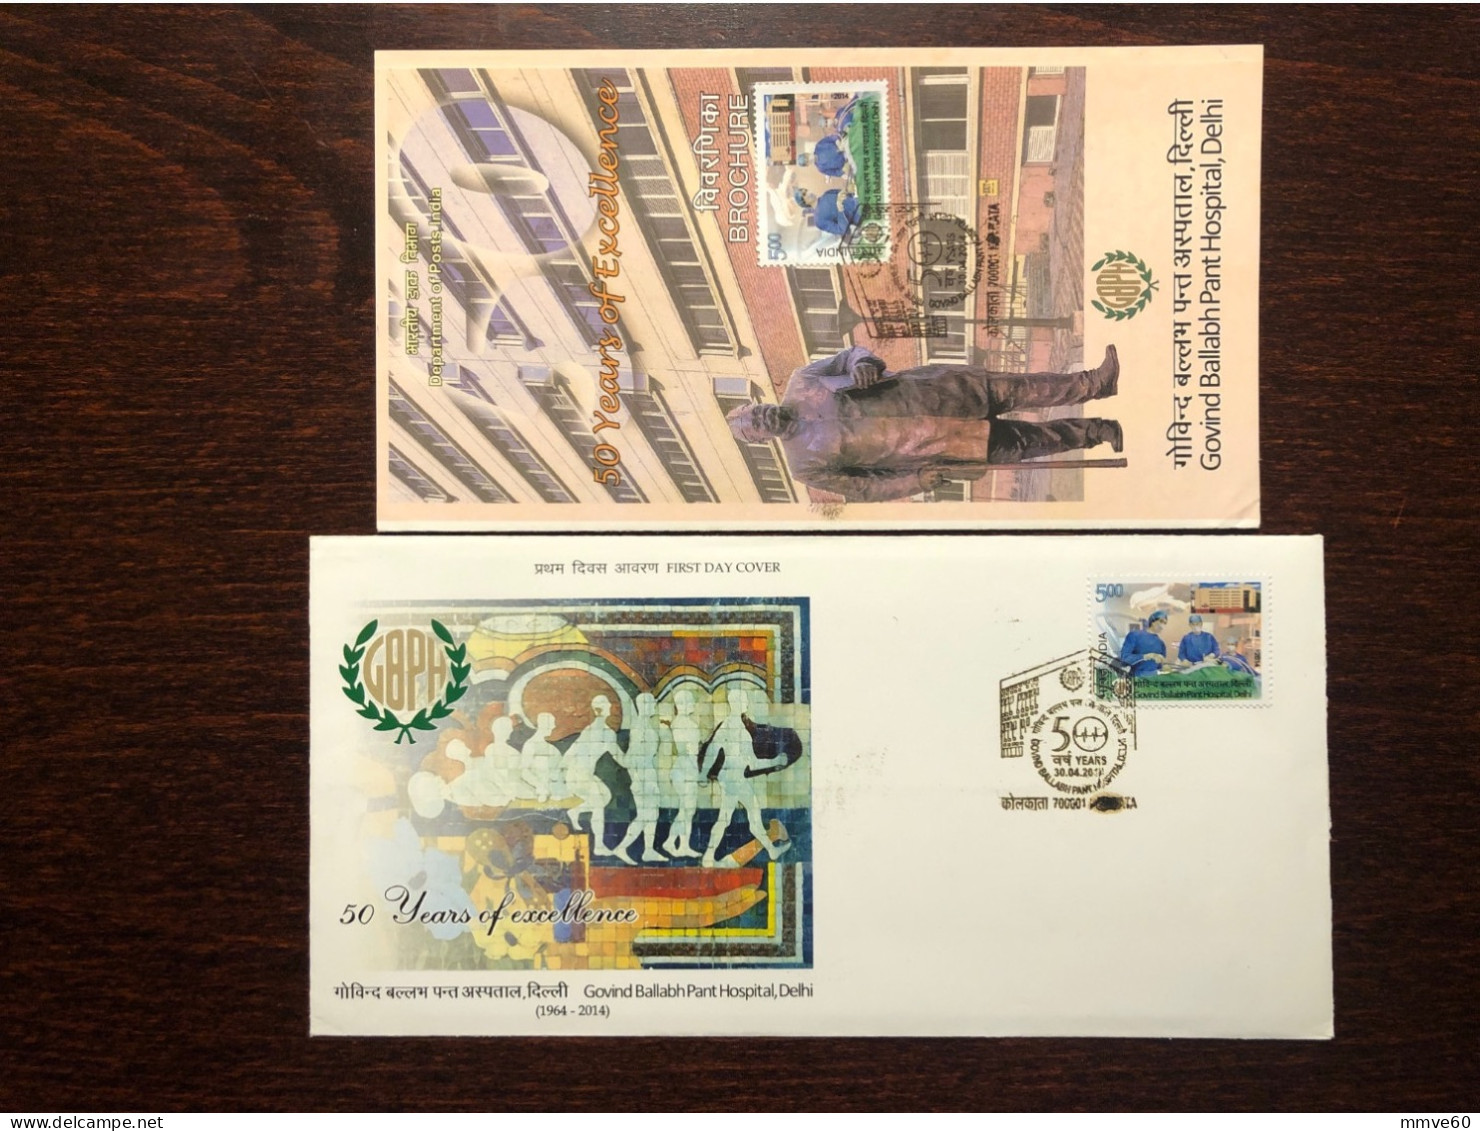 INDIA FDC COVER 2014 YEAR HOSPITAL HEALTH MEDICINE STAMPS - Covers & Documents